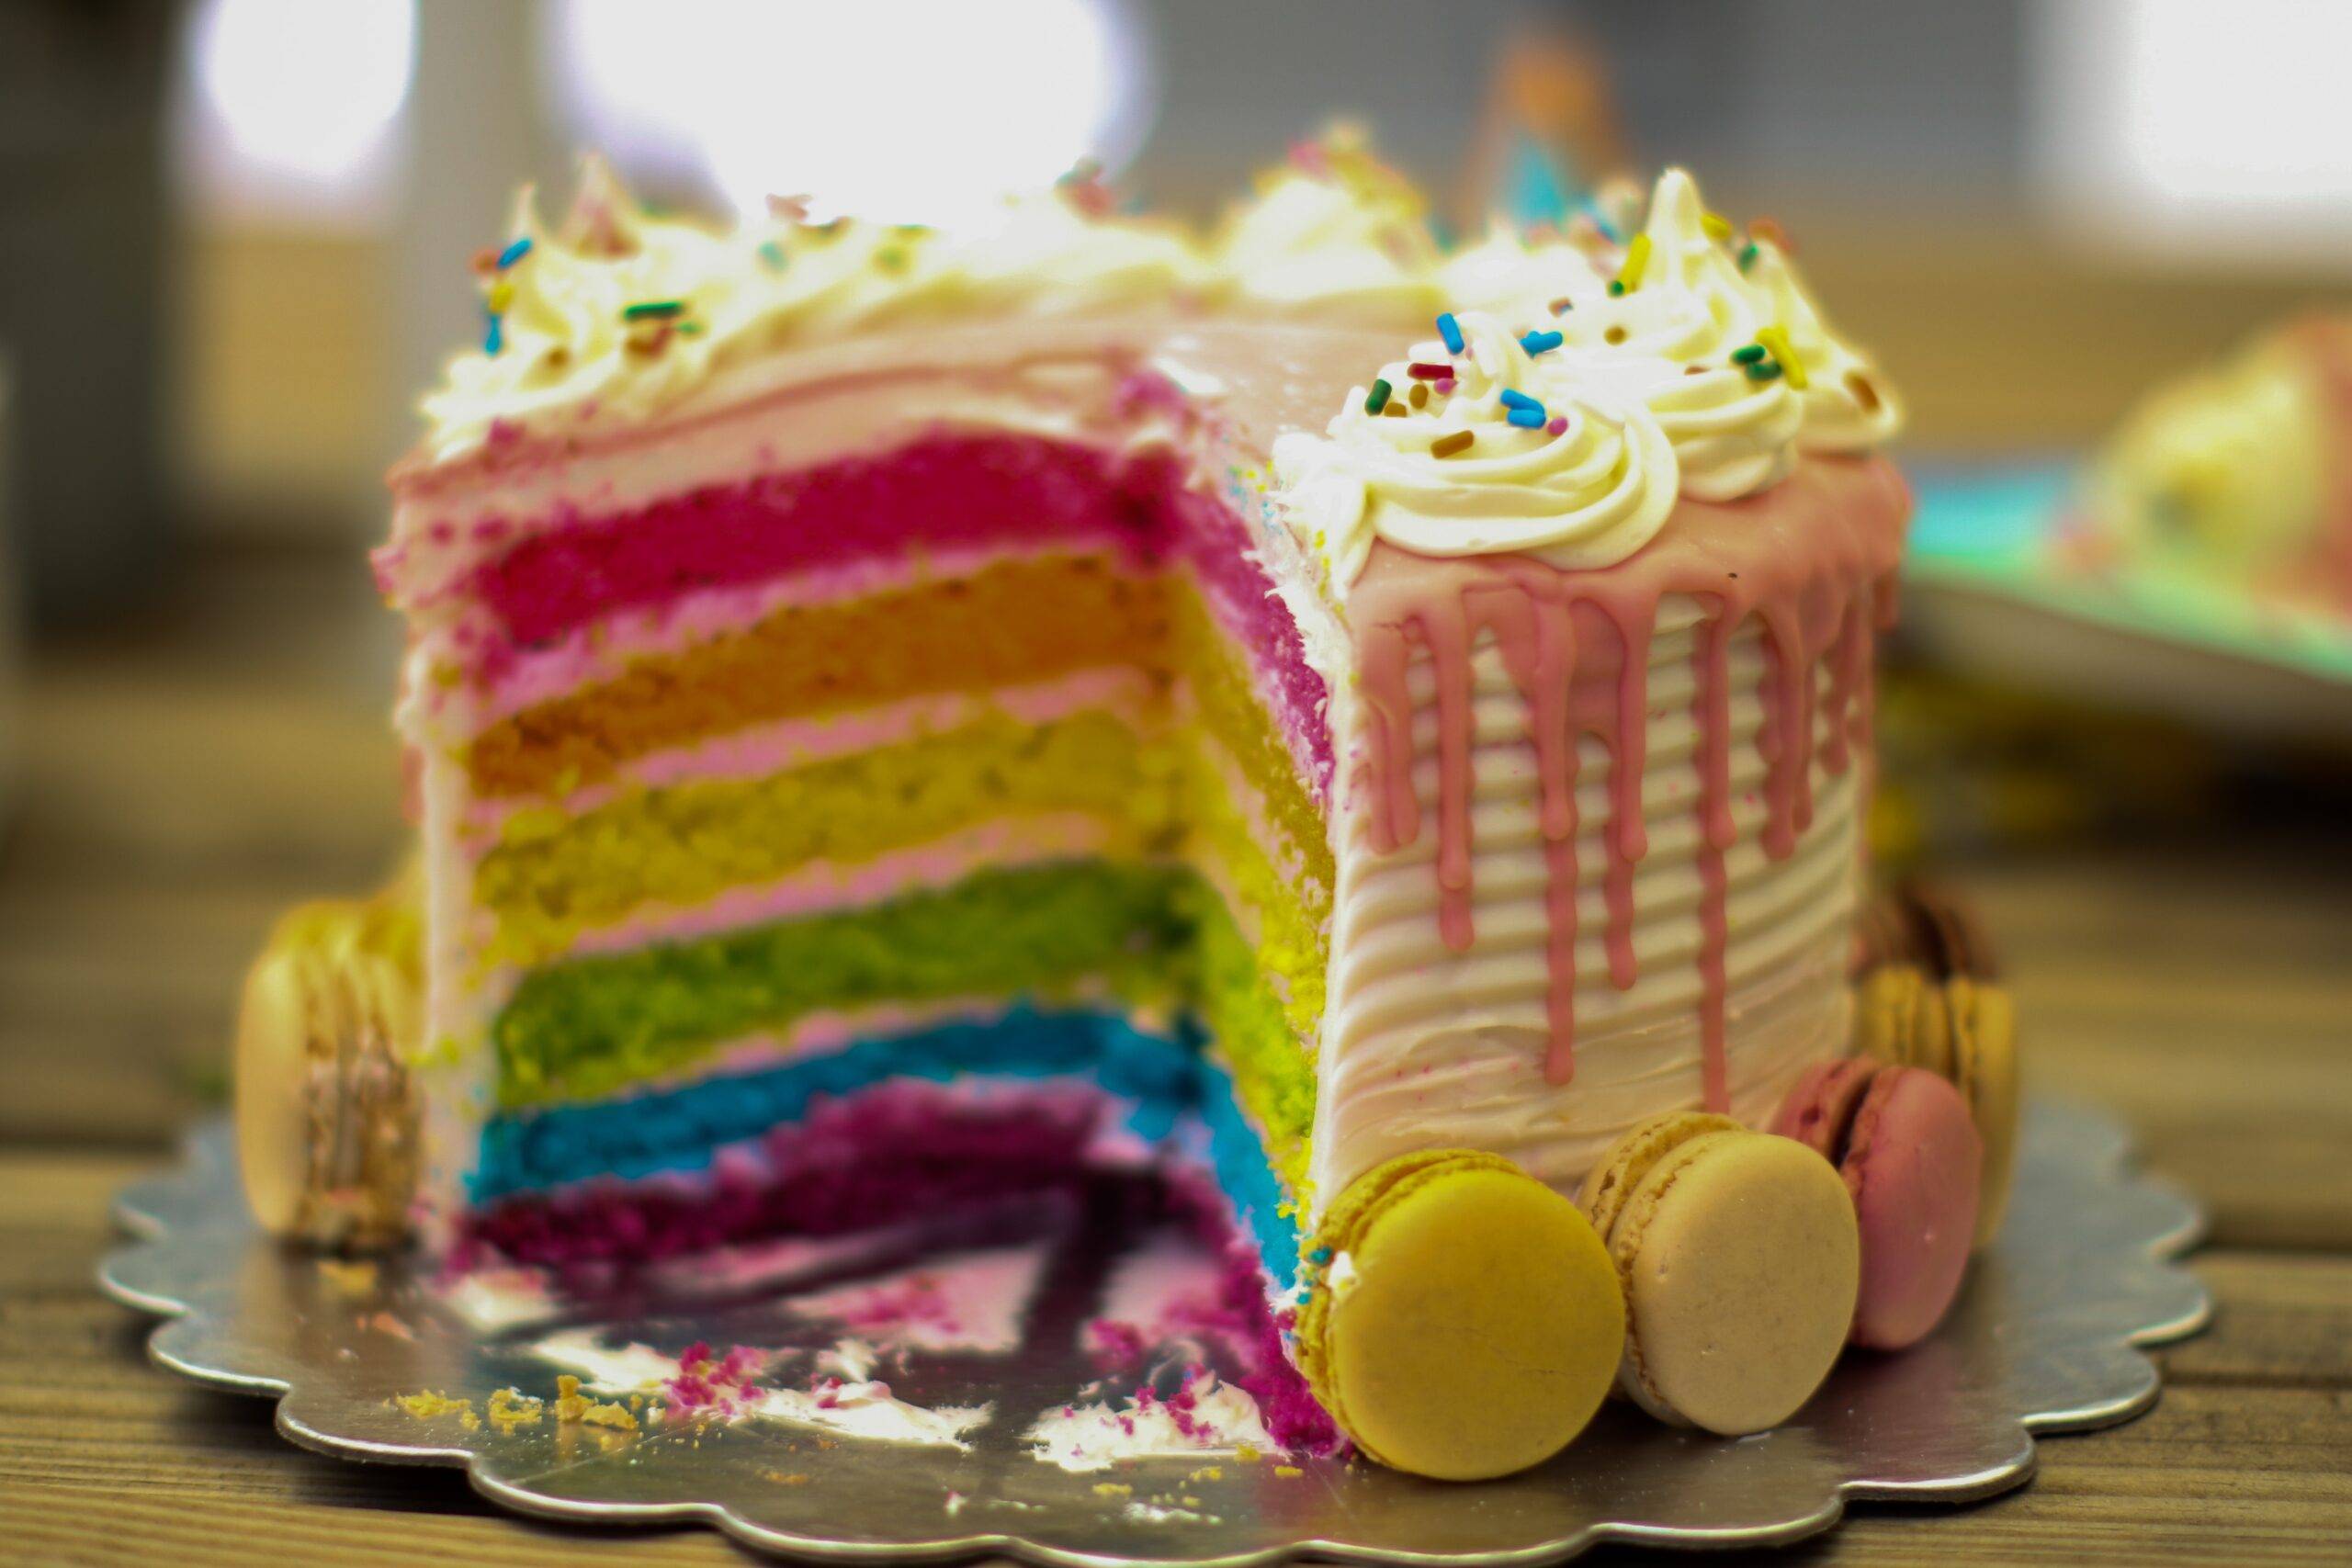 What Is the Ultimate Guide to Birthday Cake Baking